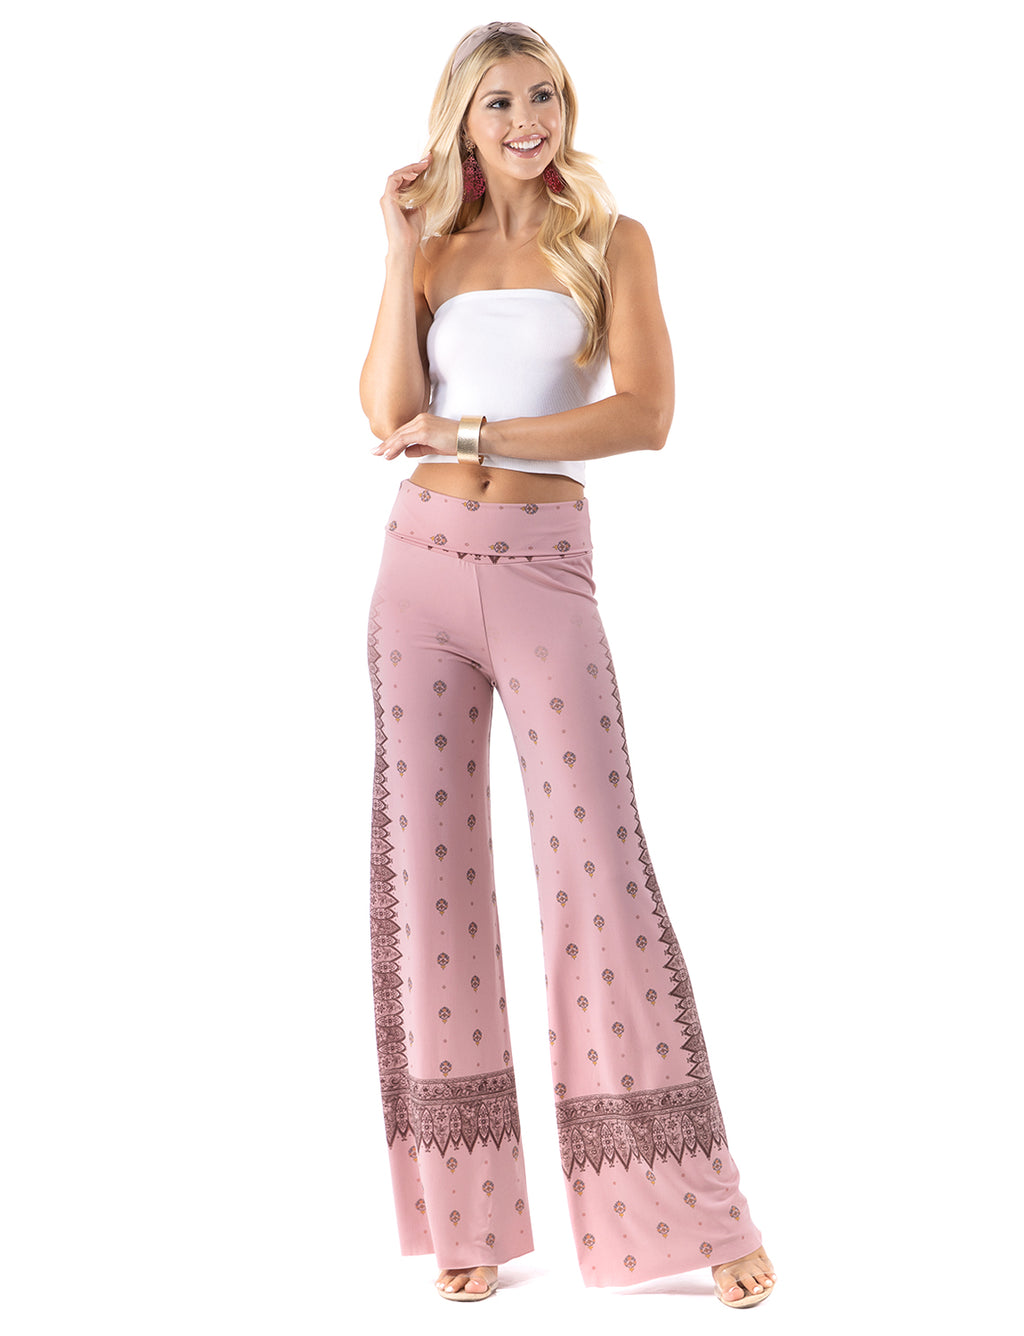 Pink Vintage Paisley High waist palazzo pants featuring pockets, wide legs, and a comfortable stretchy fabric Perfect for any activity,relaxing day,beautiful and unique,comfortable and flattering